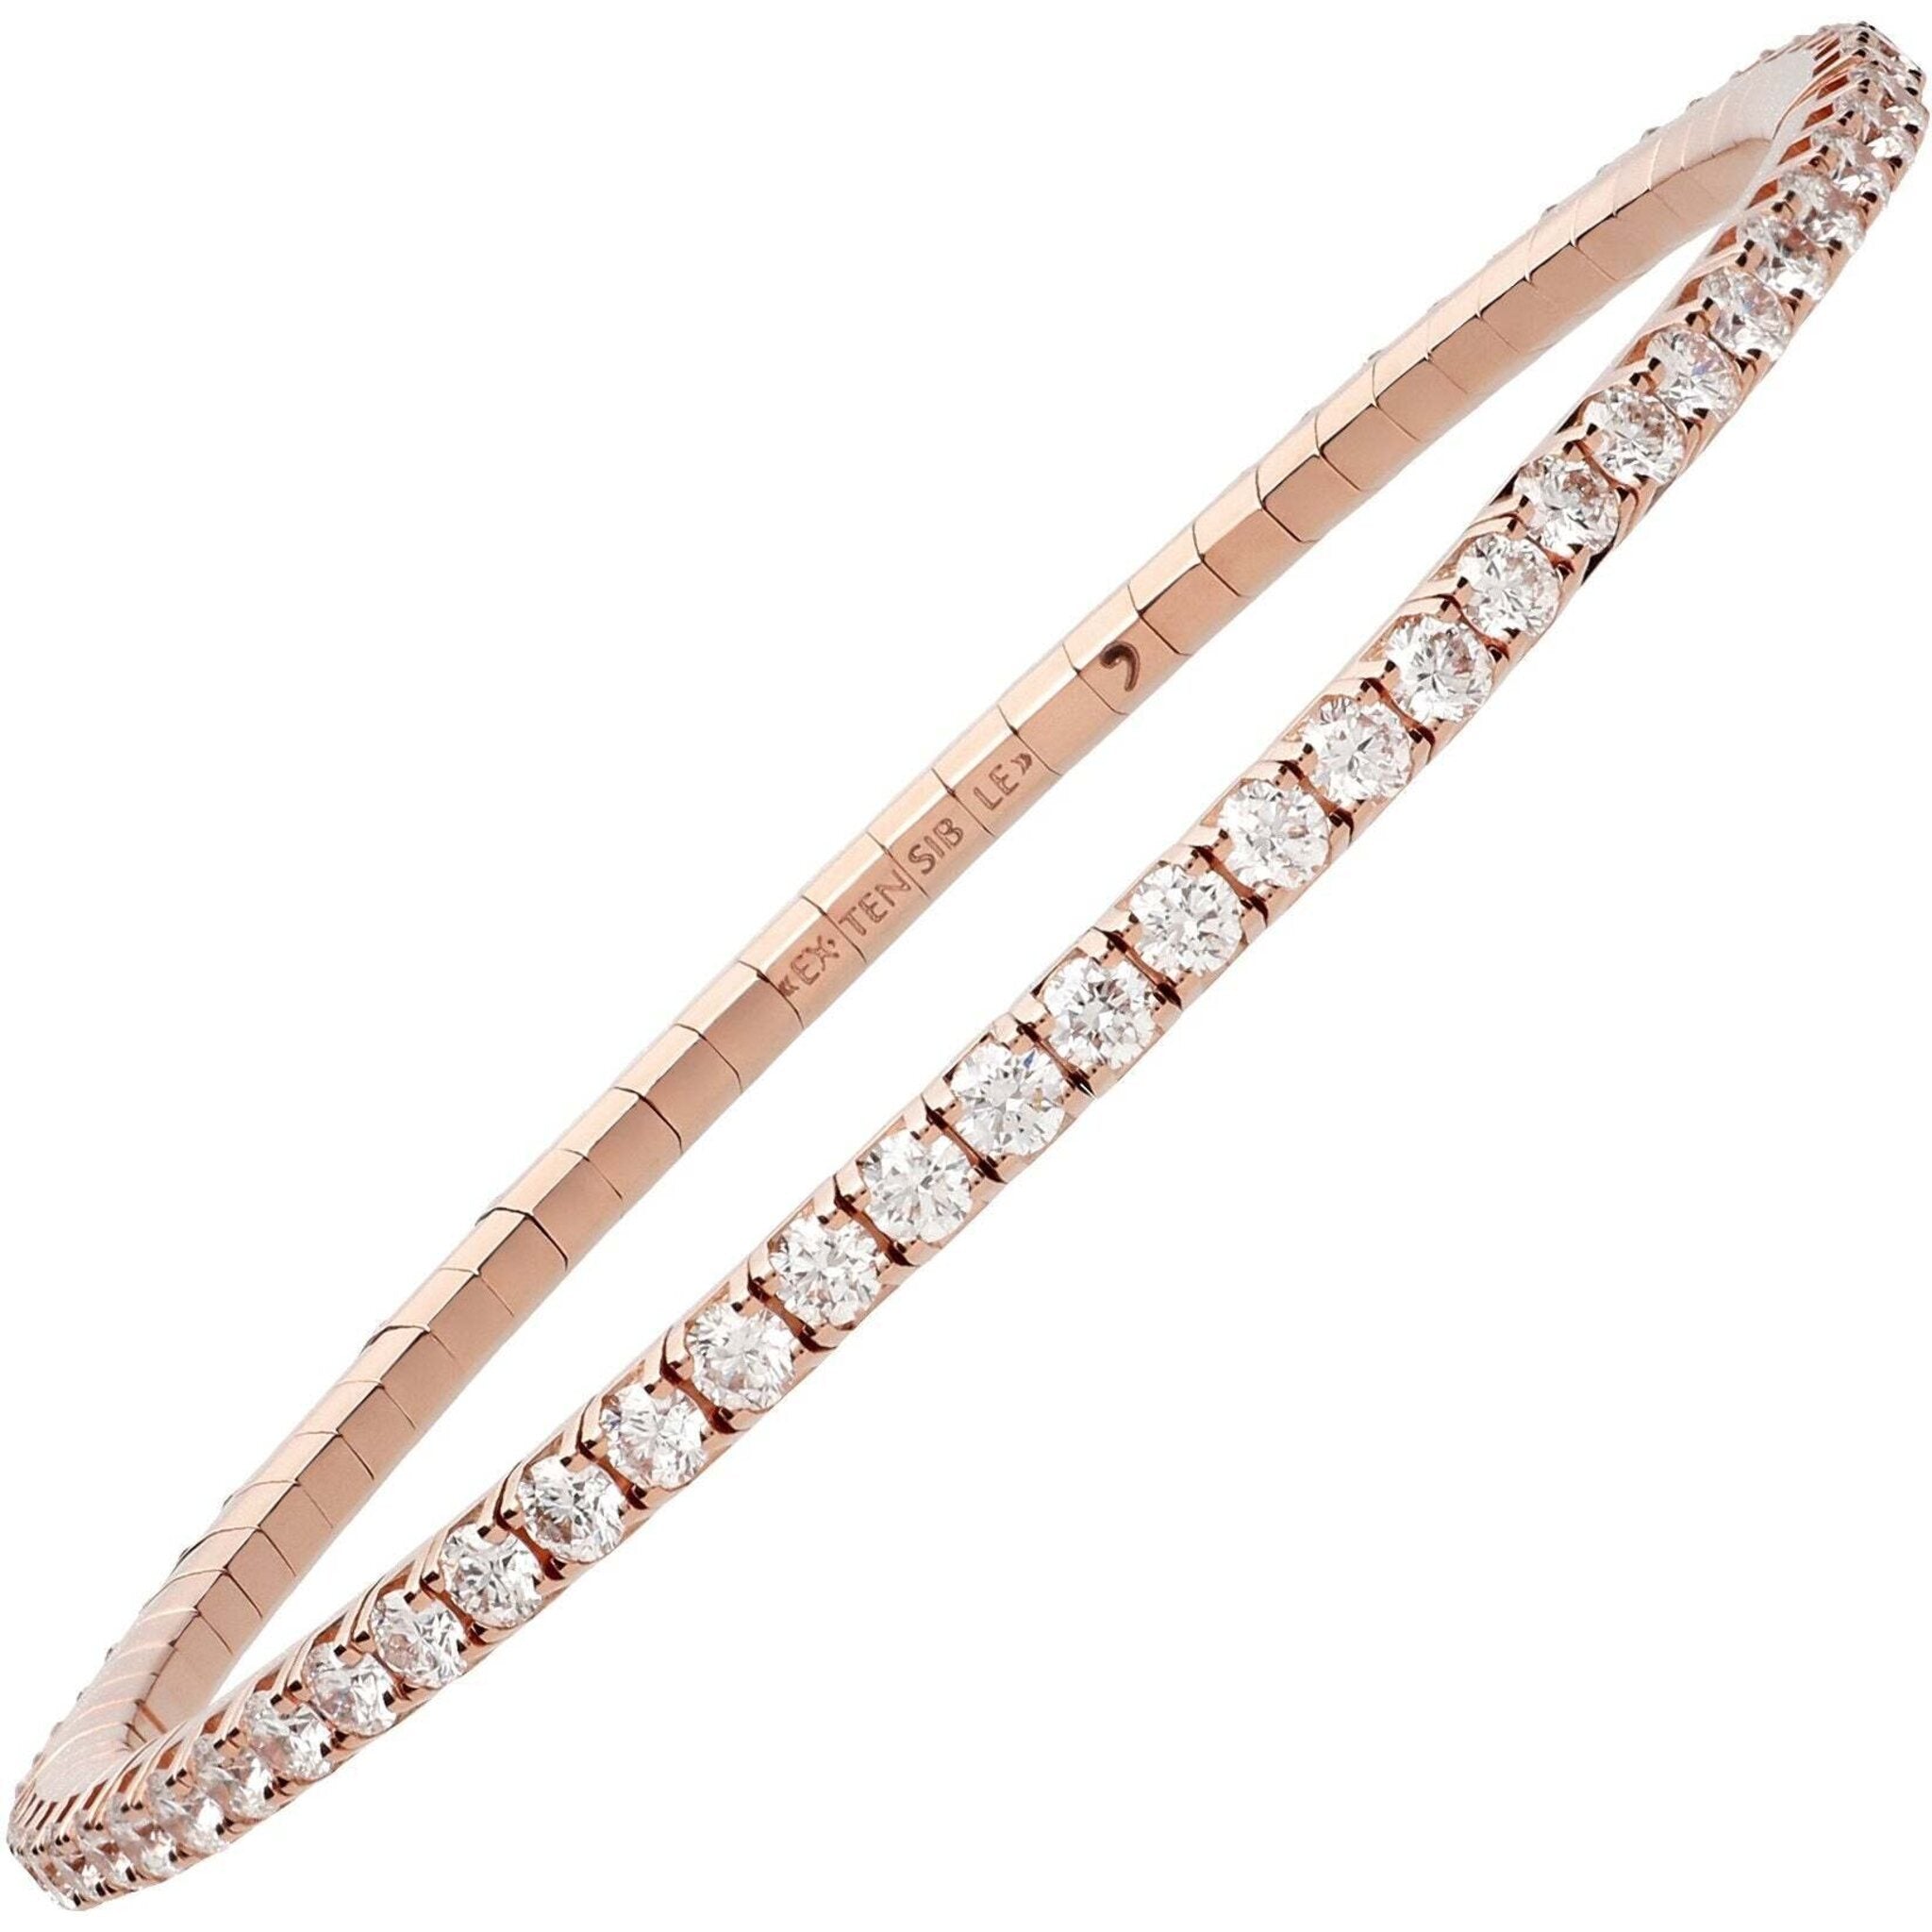 Buy Gorgeous 18K Rose Gold Black Stone Link Chain Bracelet Set With Round,  Marquise, And Baguette Diamond Jewelry Online | Madanji Meghraj